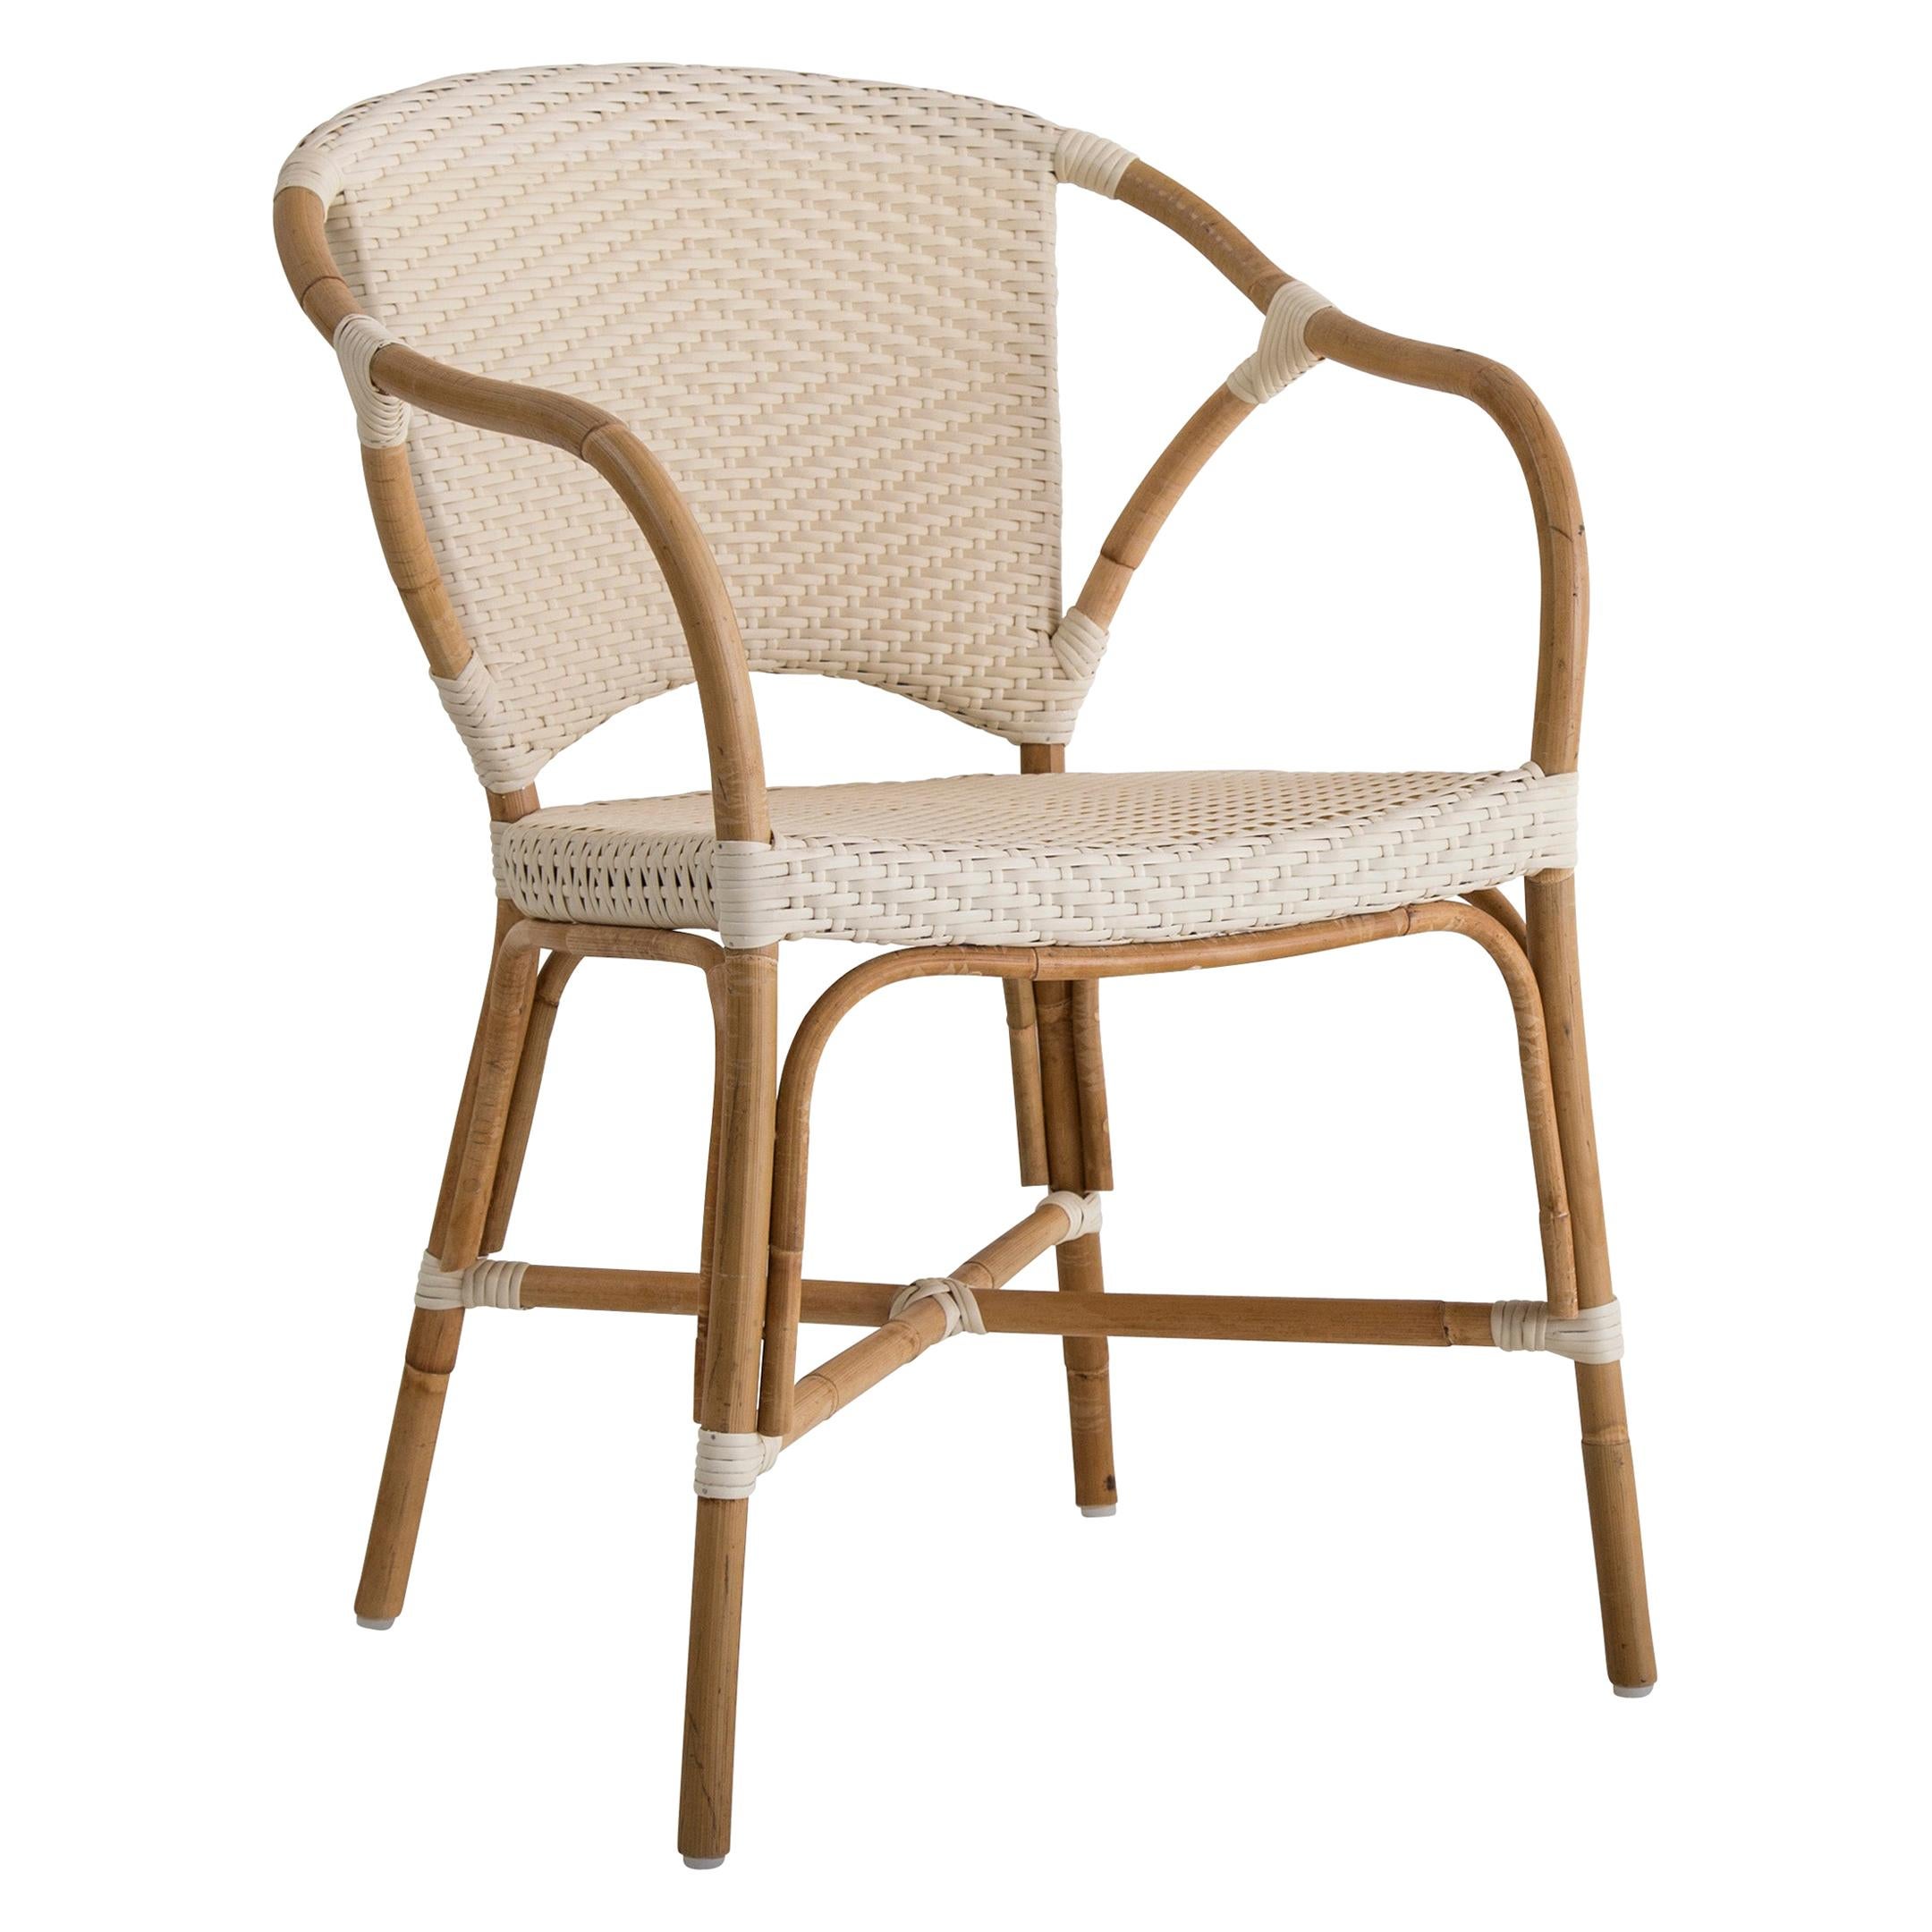 Sika Design Valerie Woven Rattan Bistro Chair in Ivory